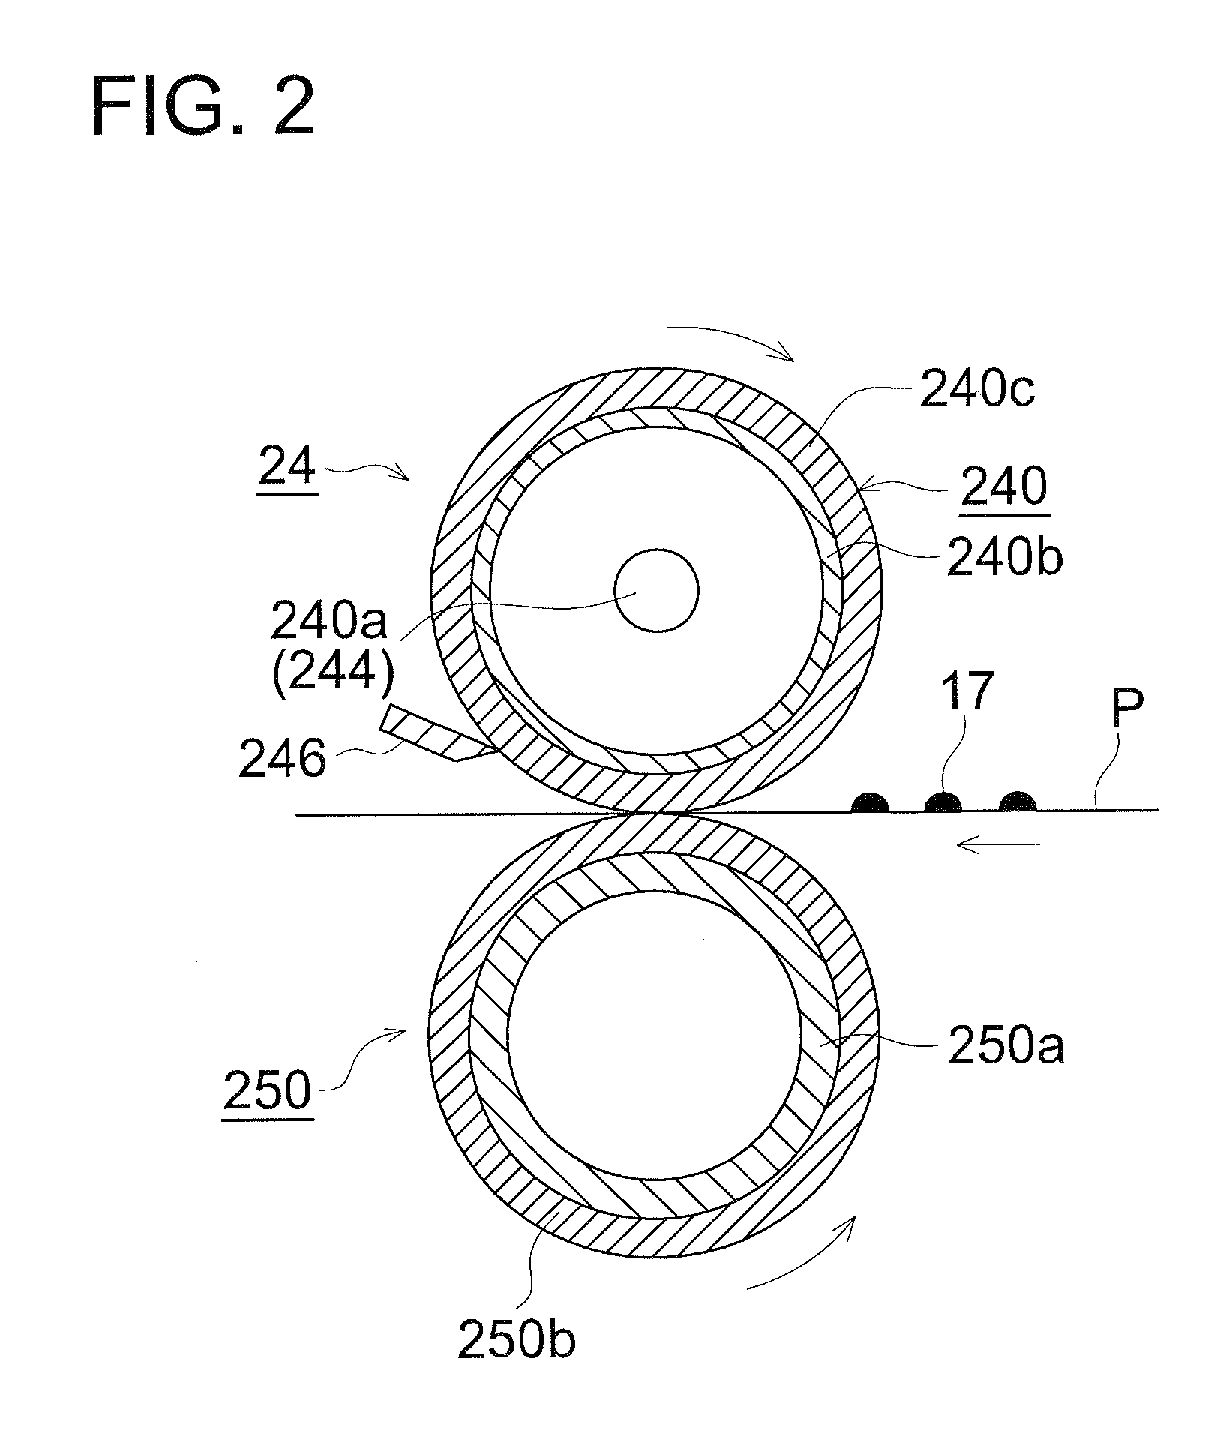 Electrostatic latent image developing toner and method of image forming